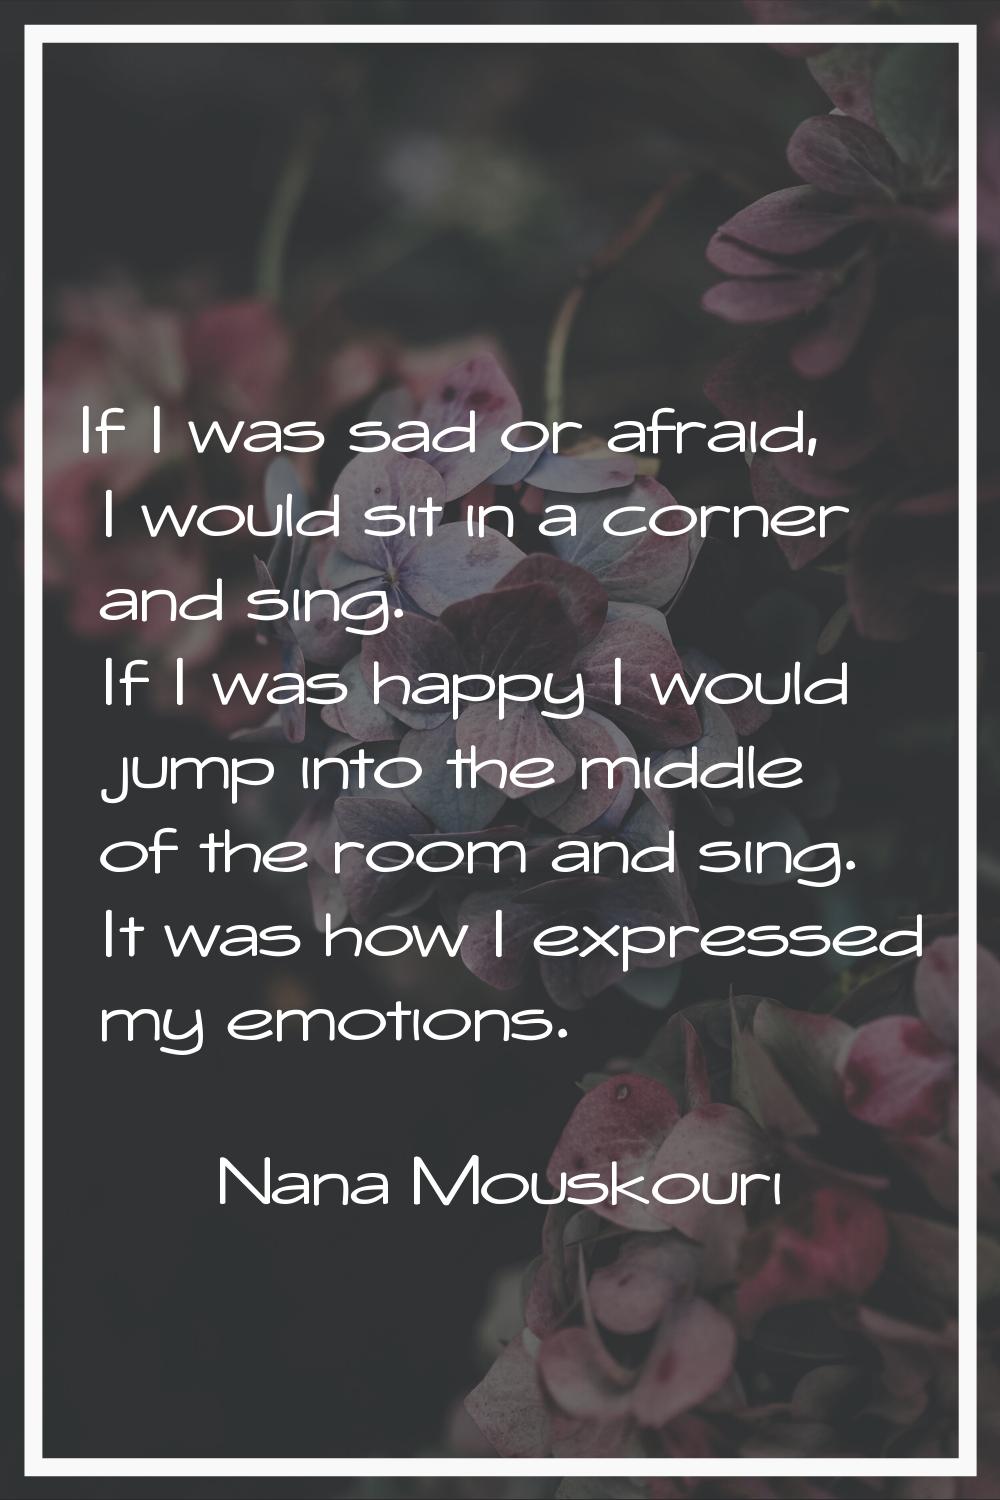 If I was sad or afraid, I would sit in a corner and sing. If I was happy I would jump into the midd